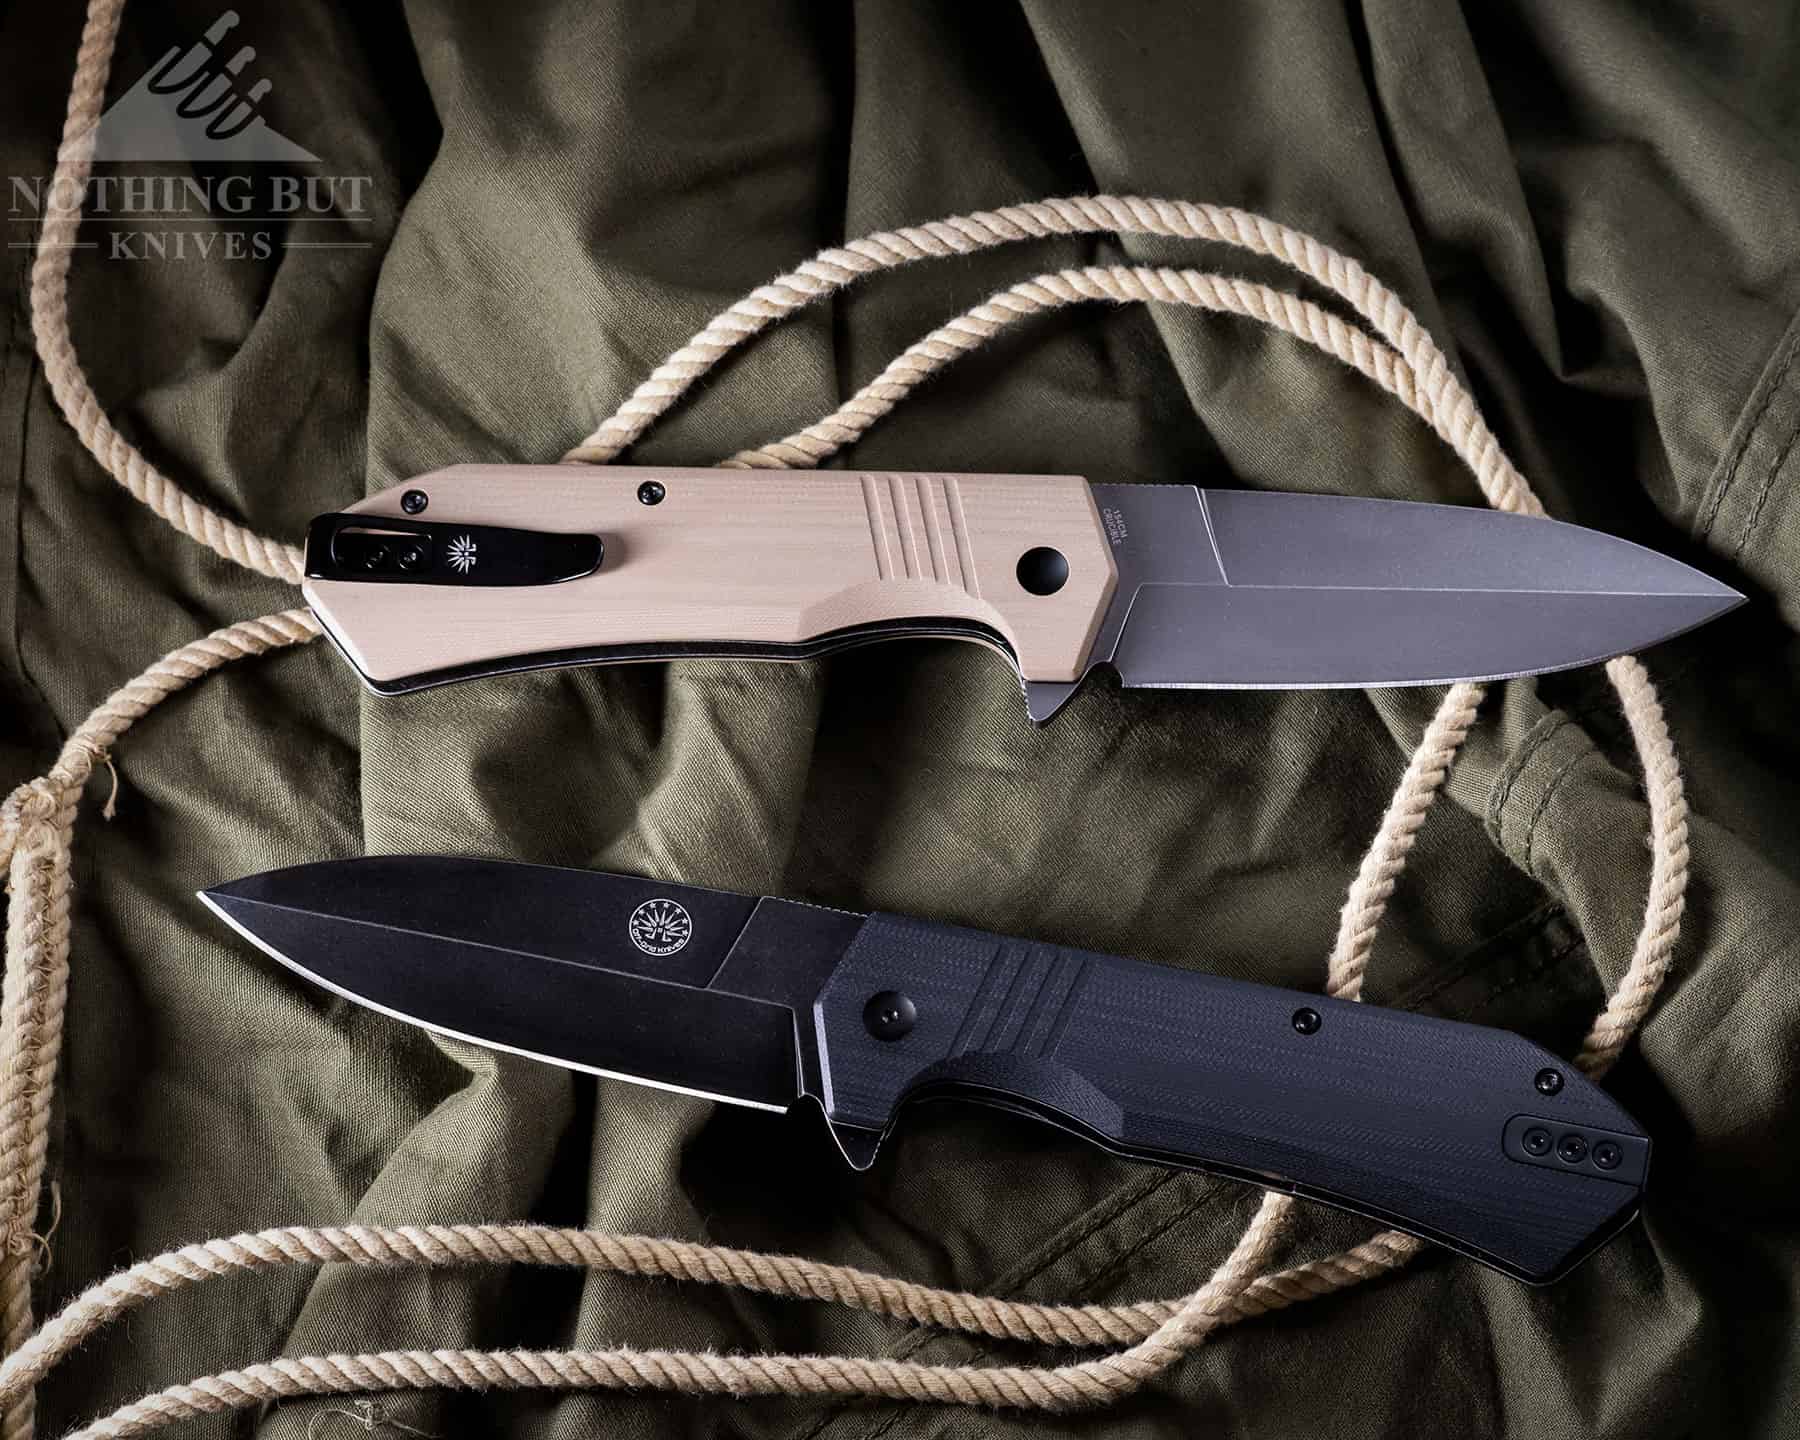 The two sides of the Off-Grid stinger folding knife showing the pocket clip on the Coyote version and the logo side of the blackout version.